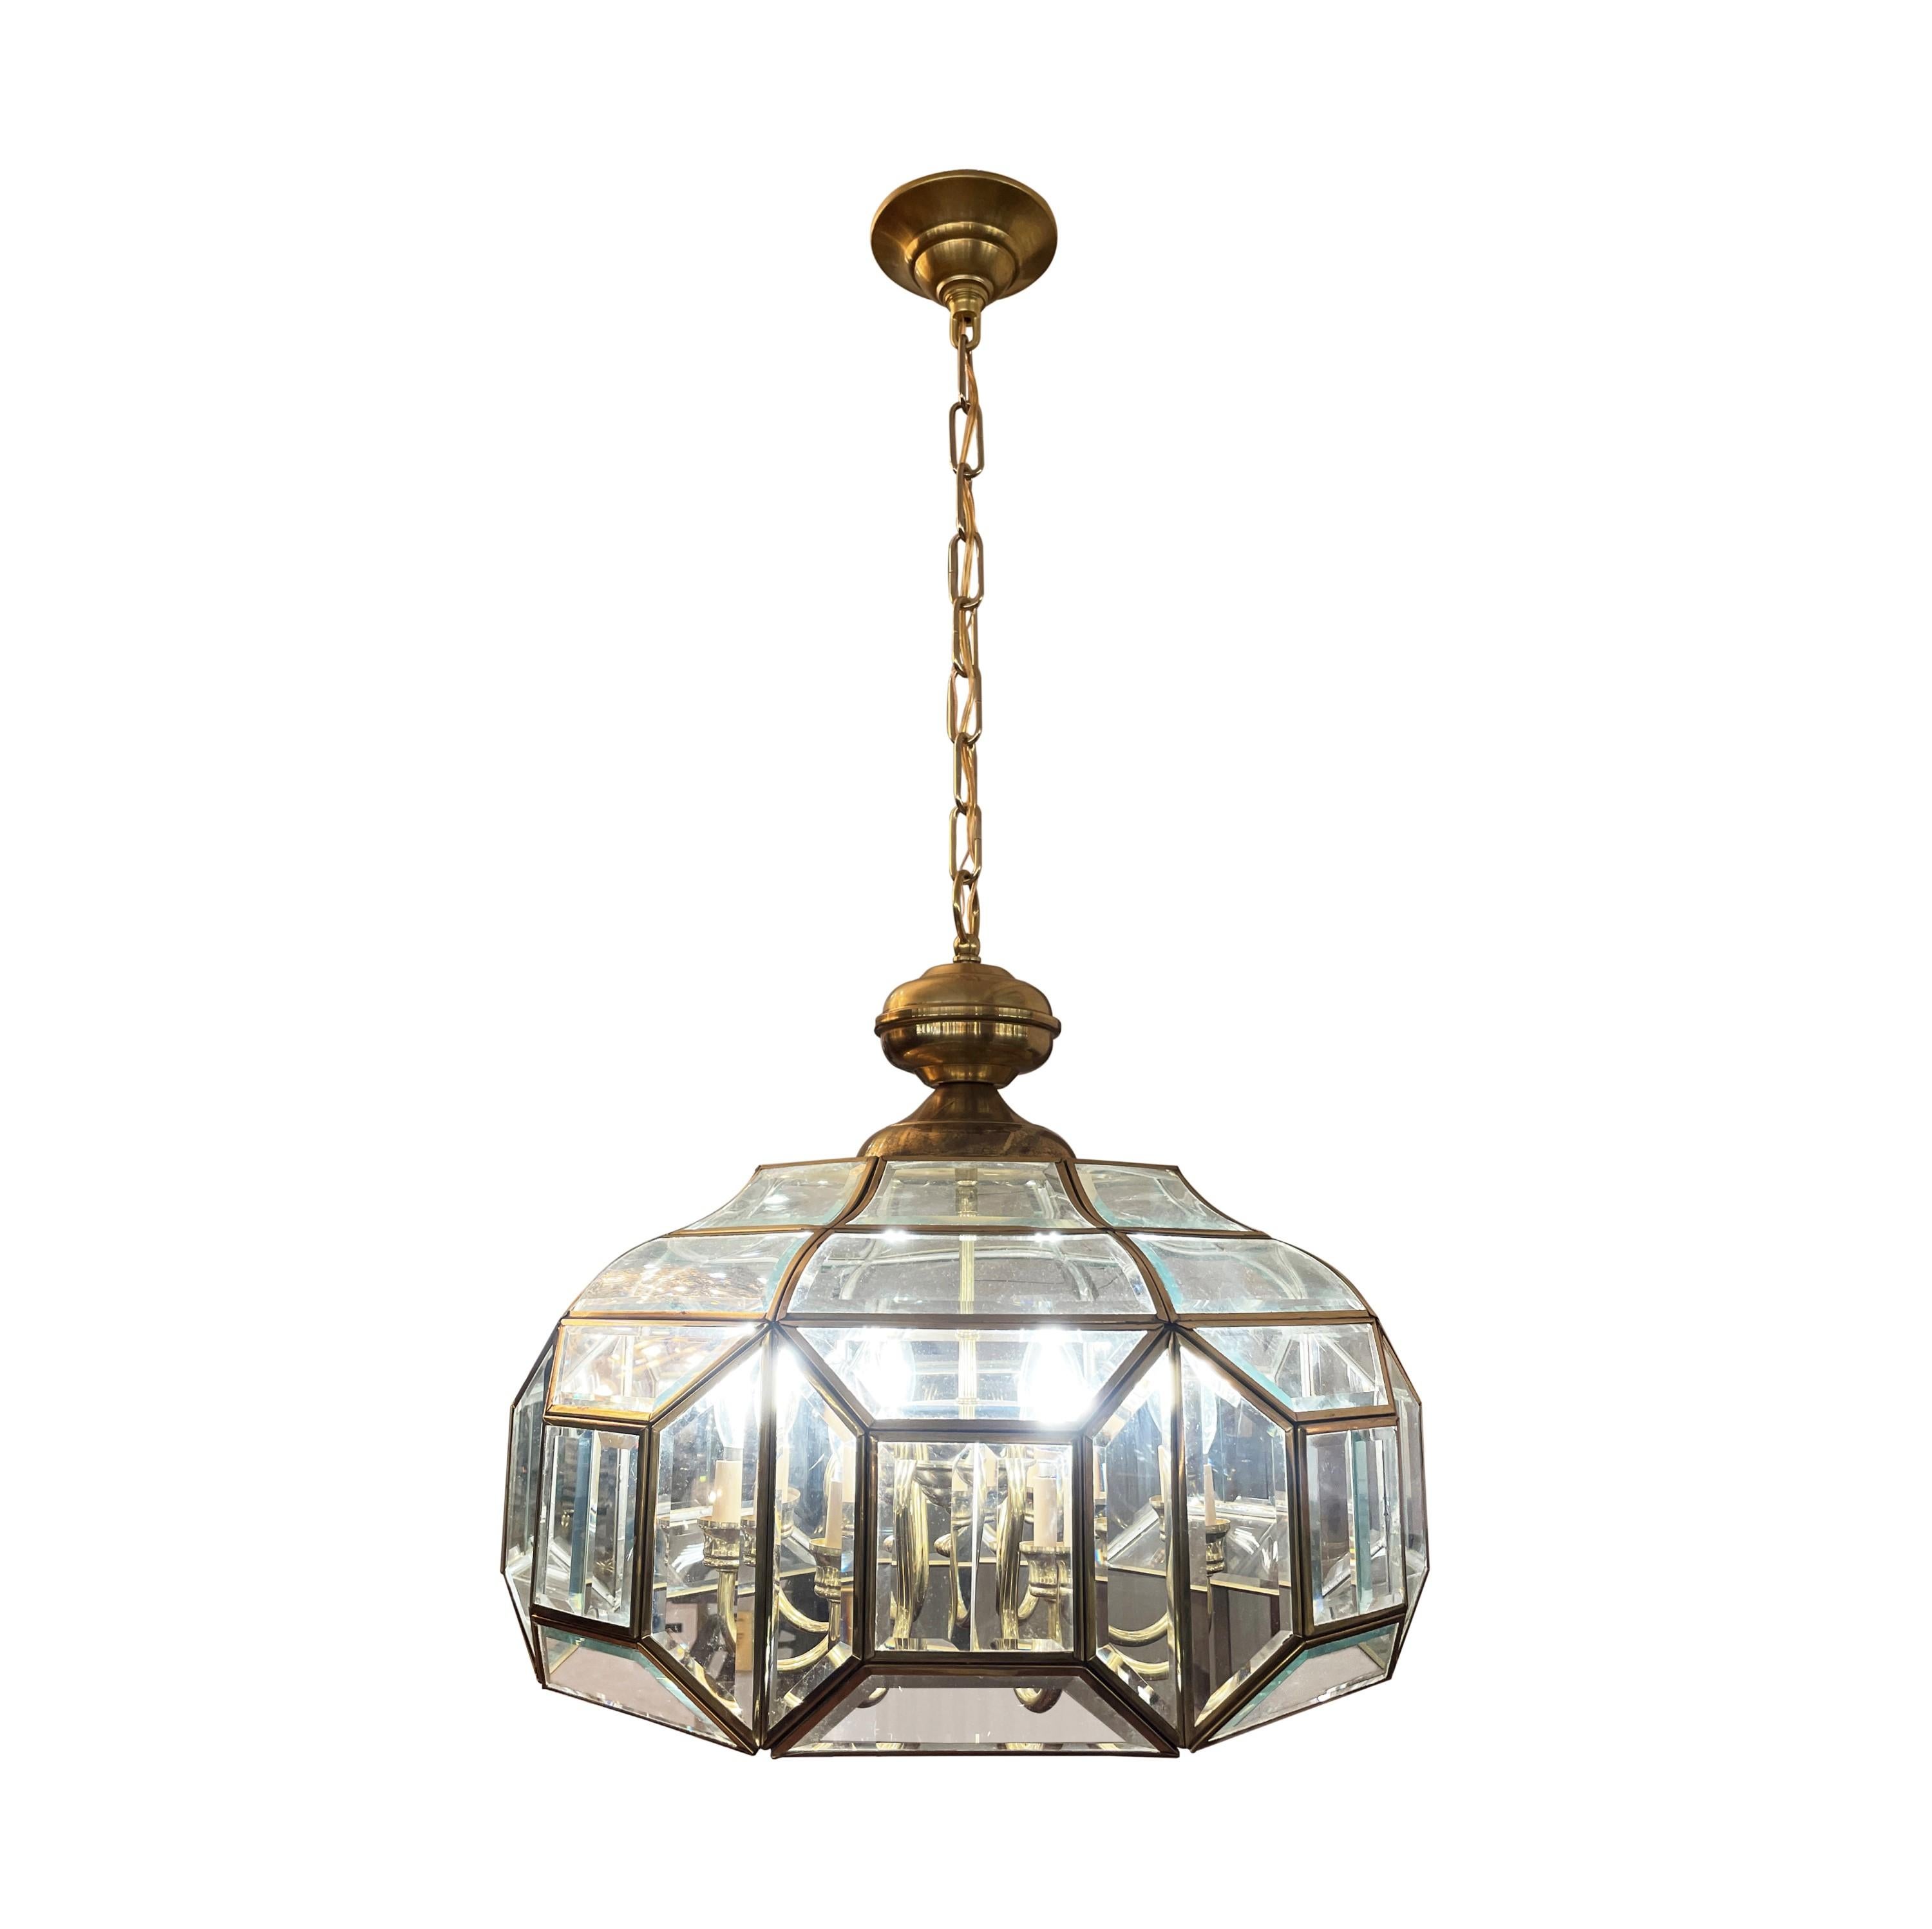 This Traditional beveled glass 8 light chandelier pendant light is a stunning centerpiece, combining classic design with sparkling beveled glass panels, intricate brass metalwork, and a warm, inviting glow, creating an enchanting ambiance. Cleaned